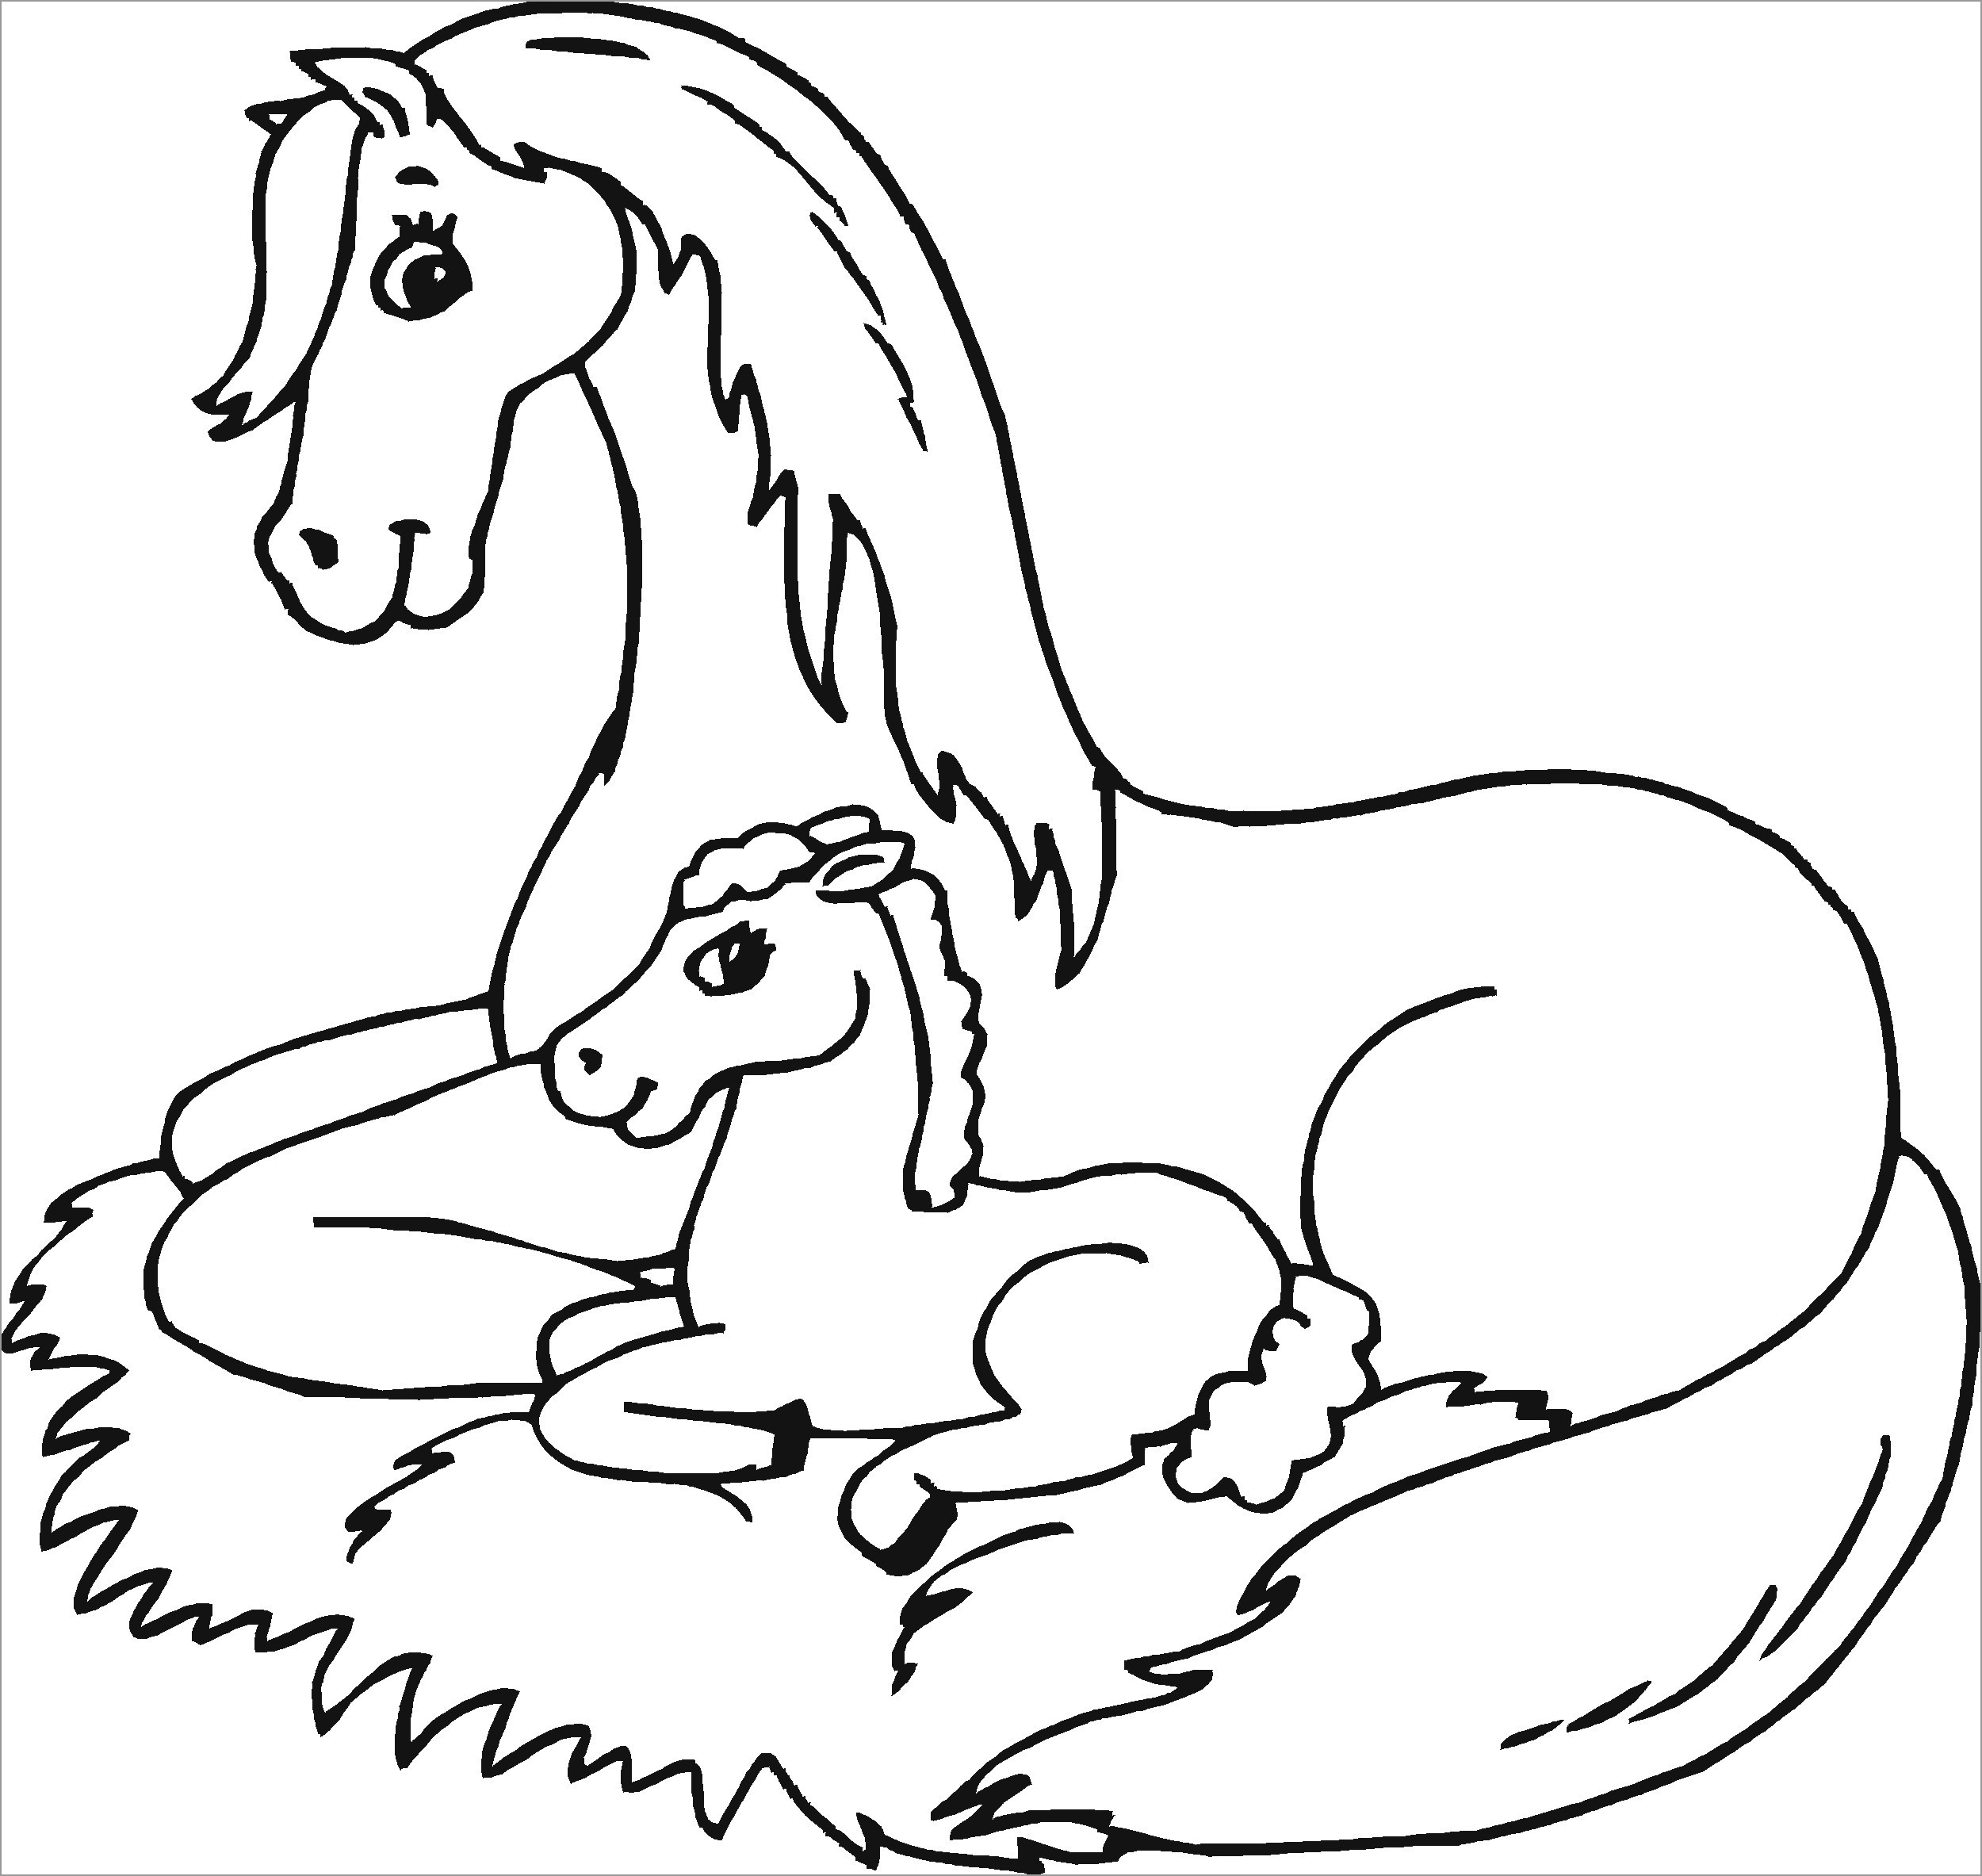 Mom and Baby Horse Coloring Page